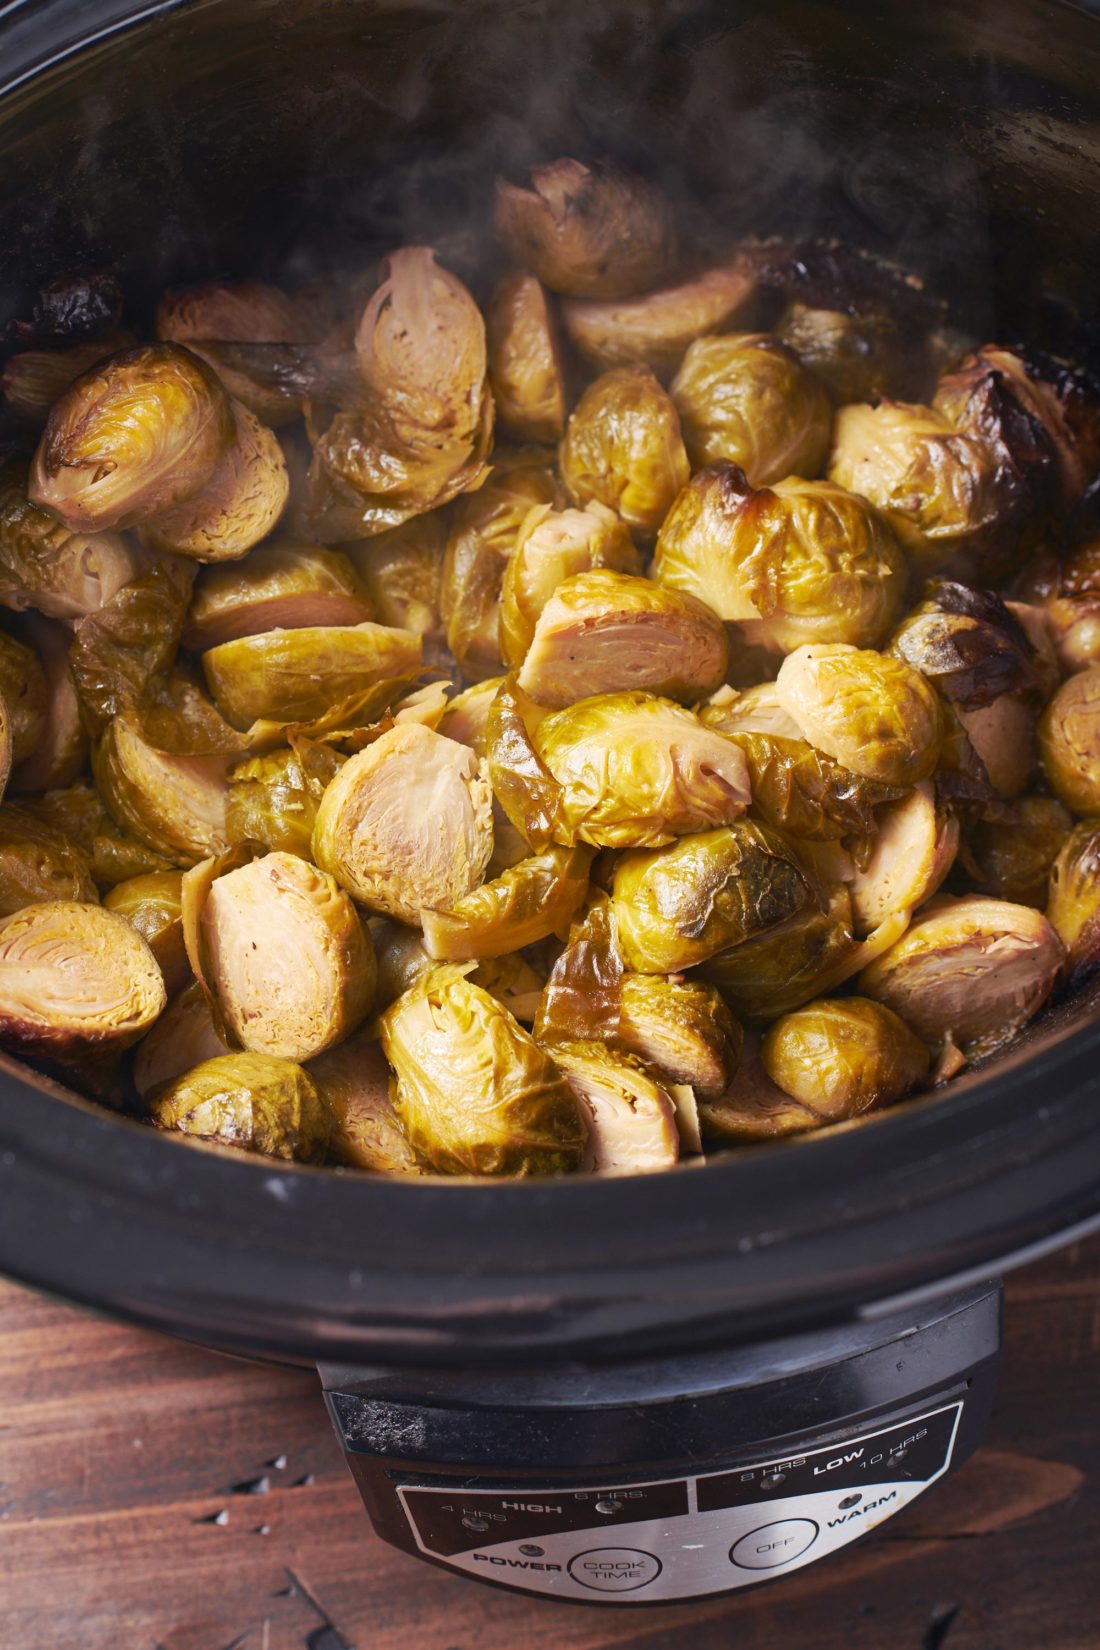 4-Ingredient Slow Cooker Maple-Dijon Brussels Sprouts